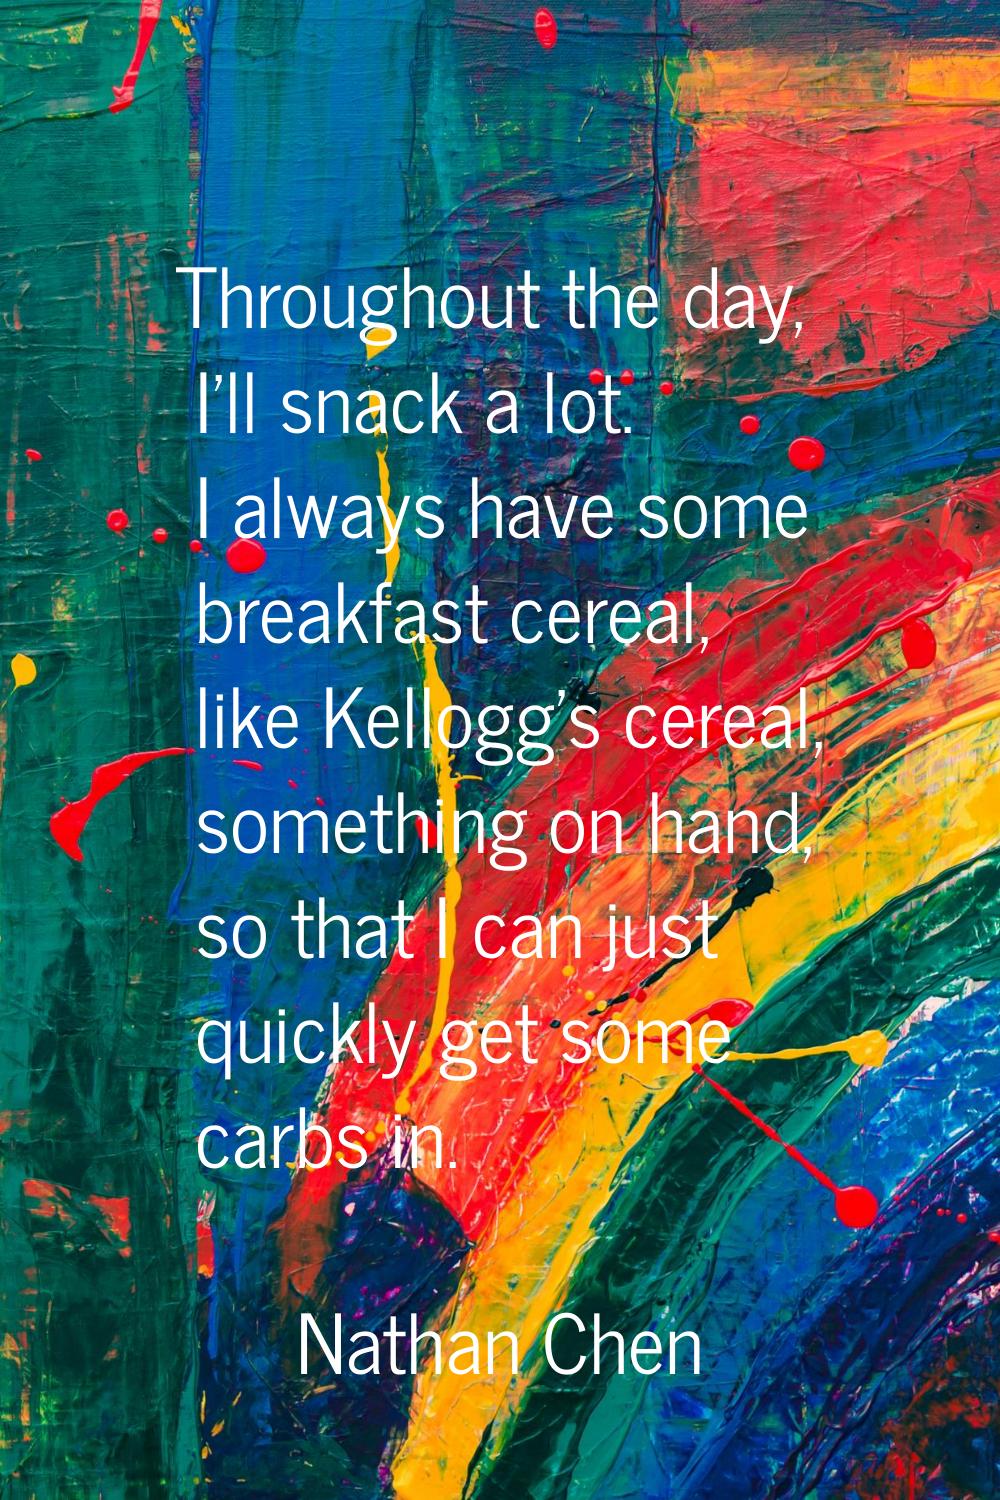 Throughout the day, I'll snack a lot. I always have some breakfast cereal, like Kellogg's cereal, s